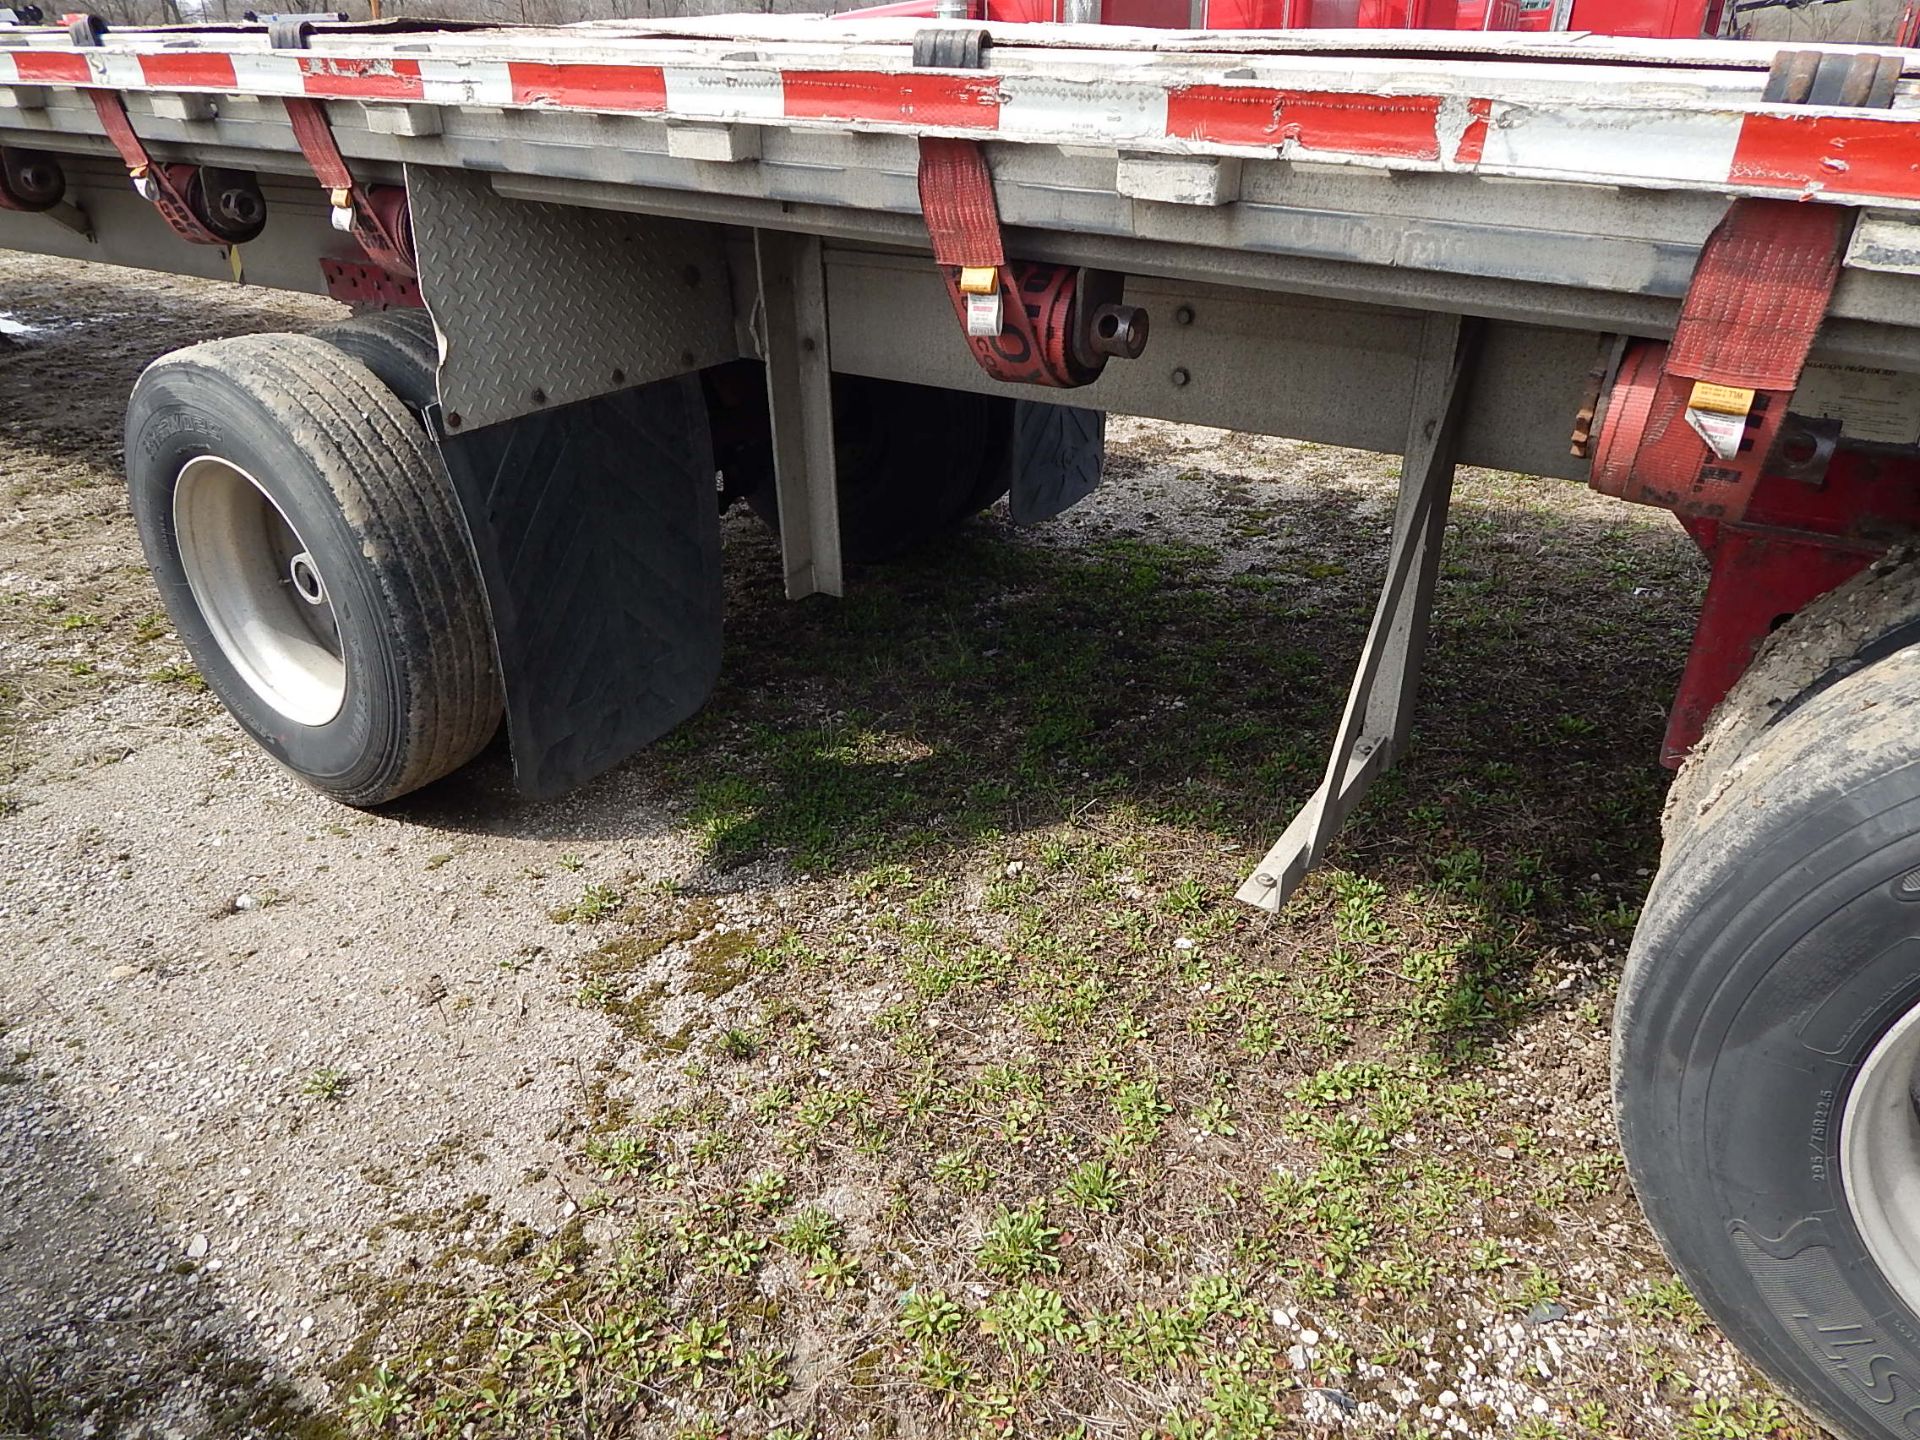 1996 Reitnouer Flat Bed Aluminum Semi Trailer, VIN: 1RNF48A27TR002404, 48 Ft., Tandem Spread Axle, - Image 8 of 13